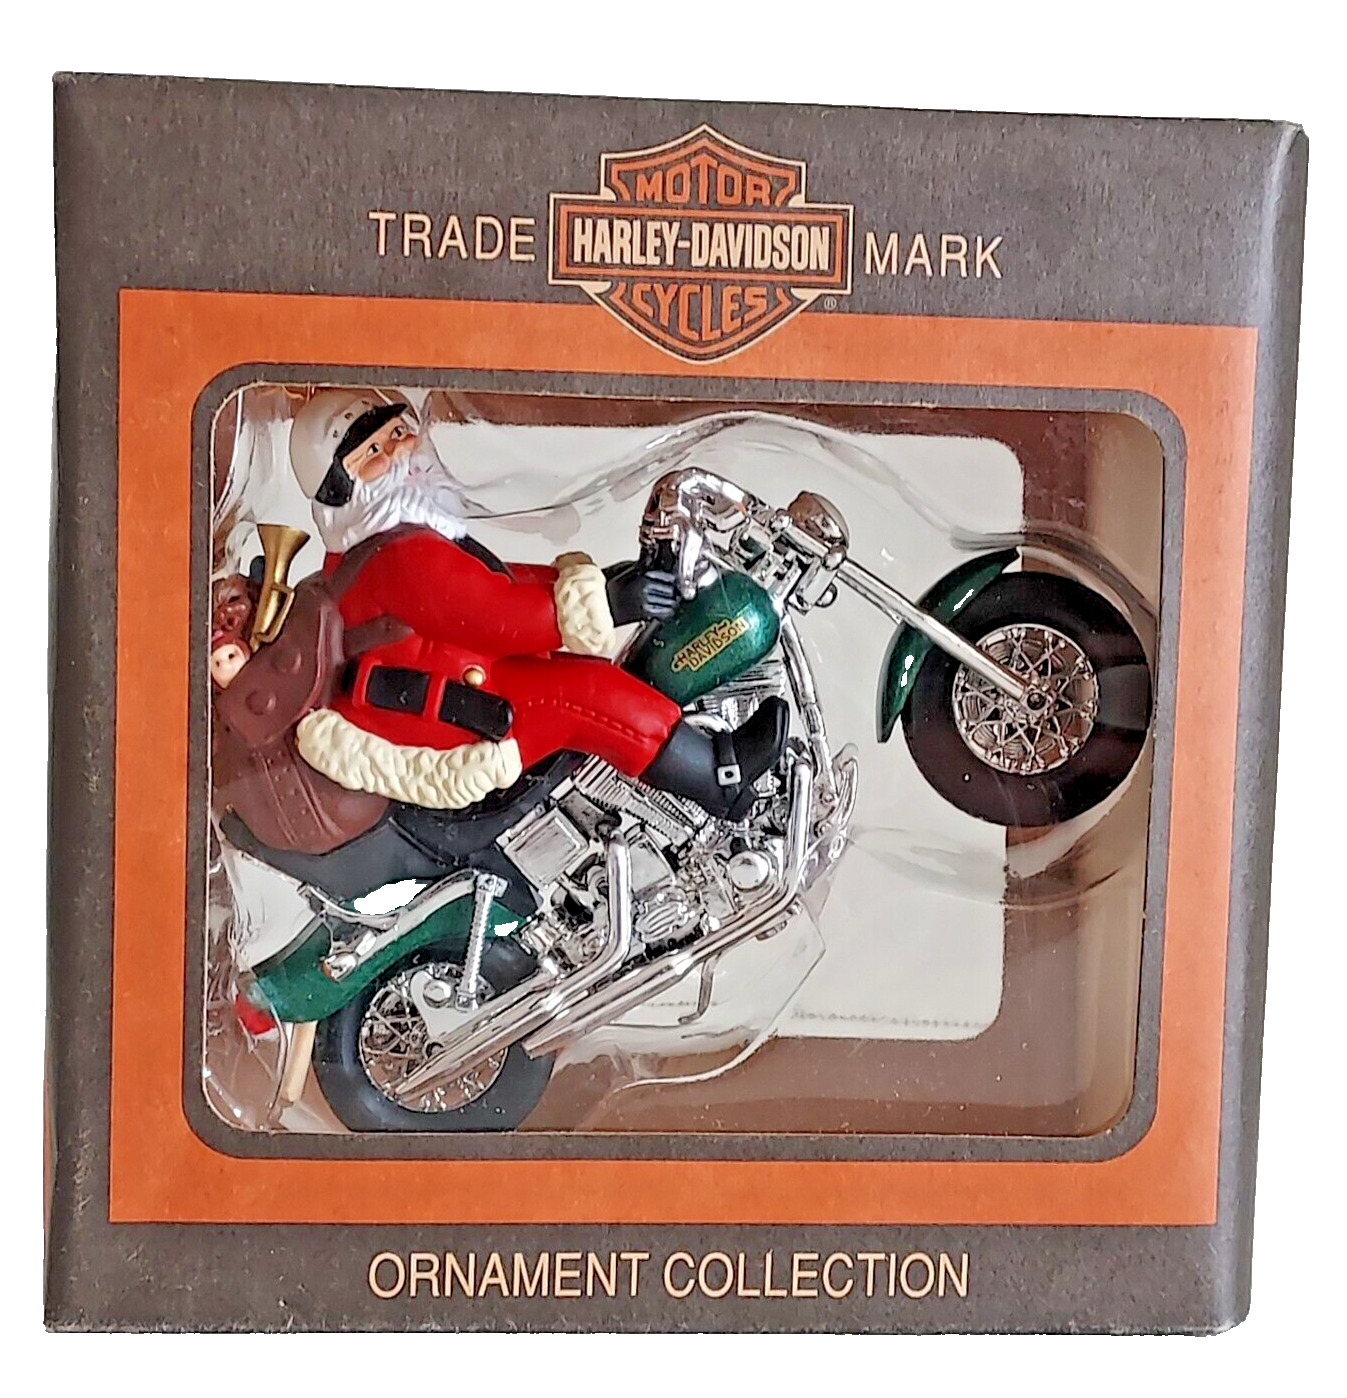 Vintage 2000 Harley Davidson Ornament Collection North Pole Motorcycle Club- New